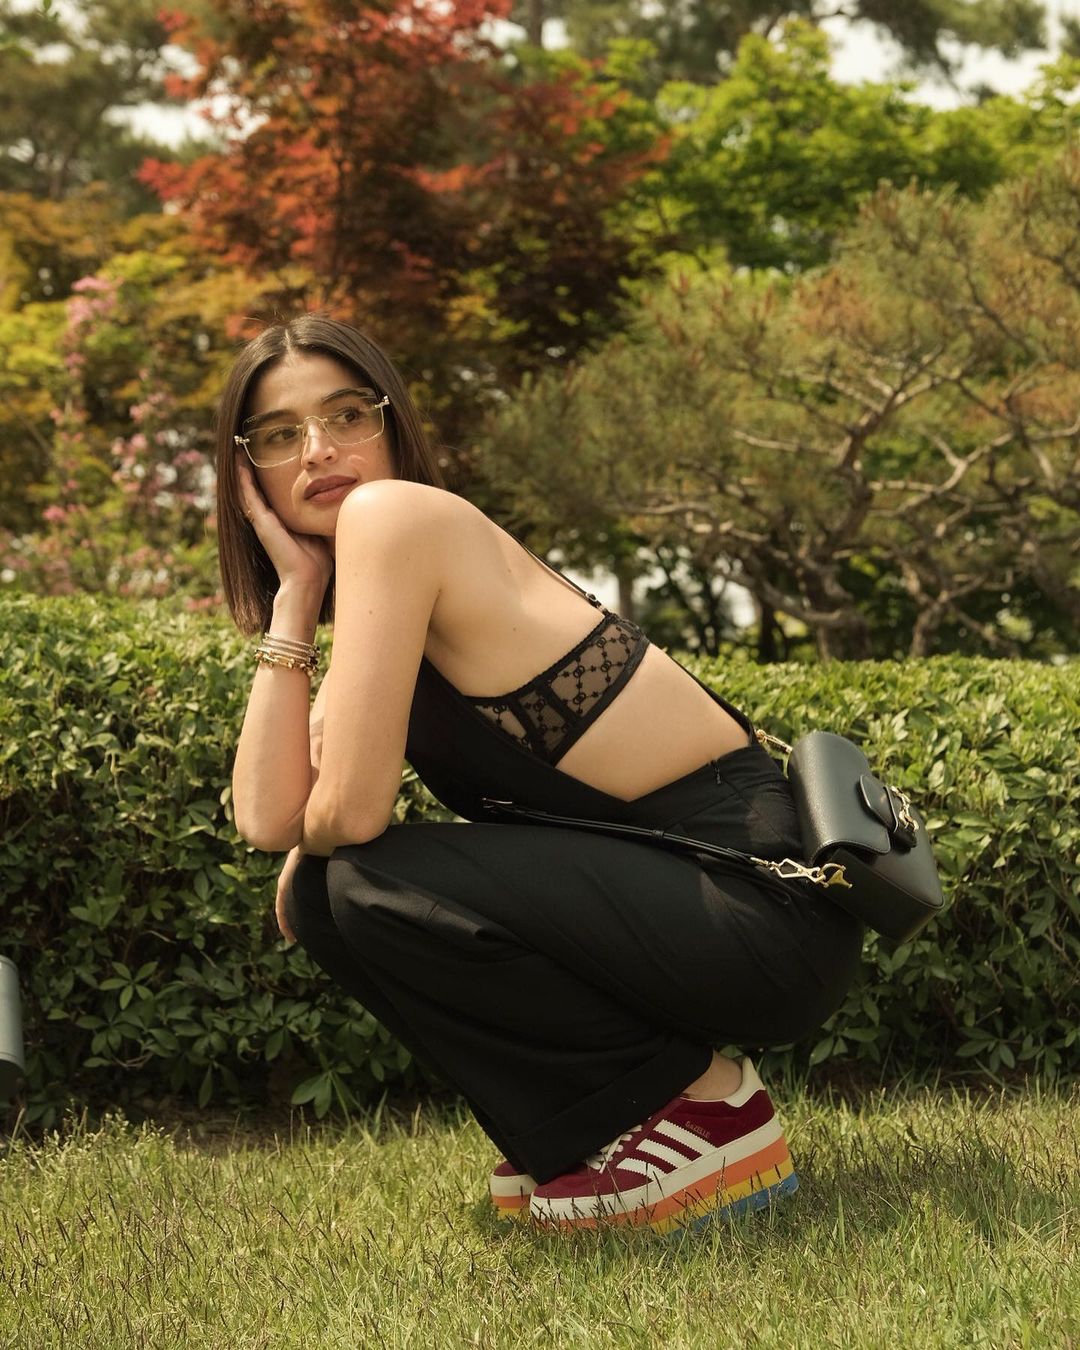 Take a peek at Anne Curtis's shoe collection